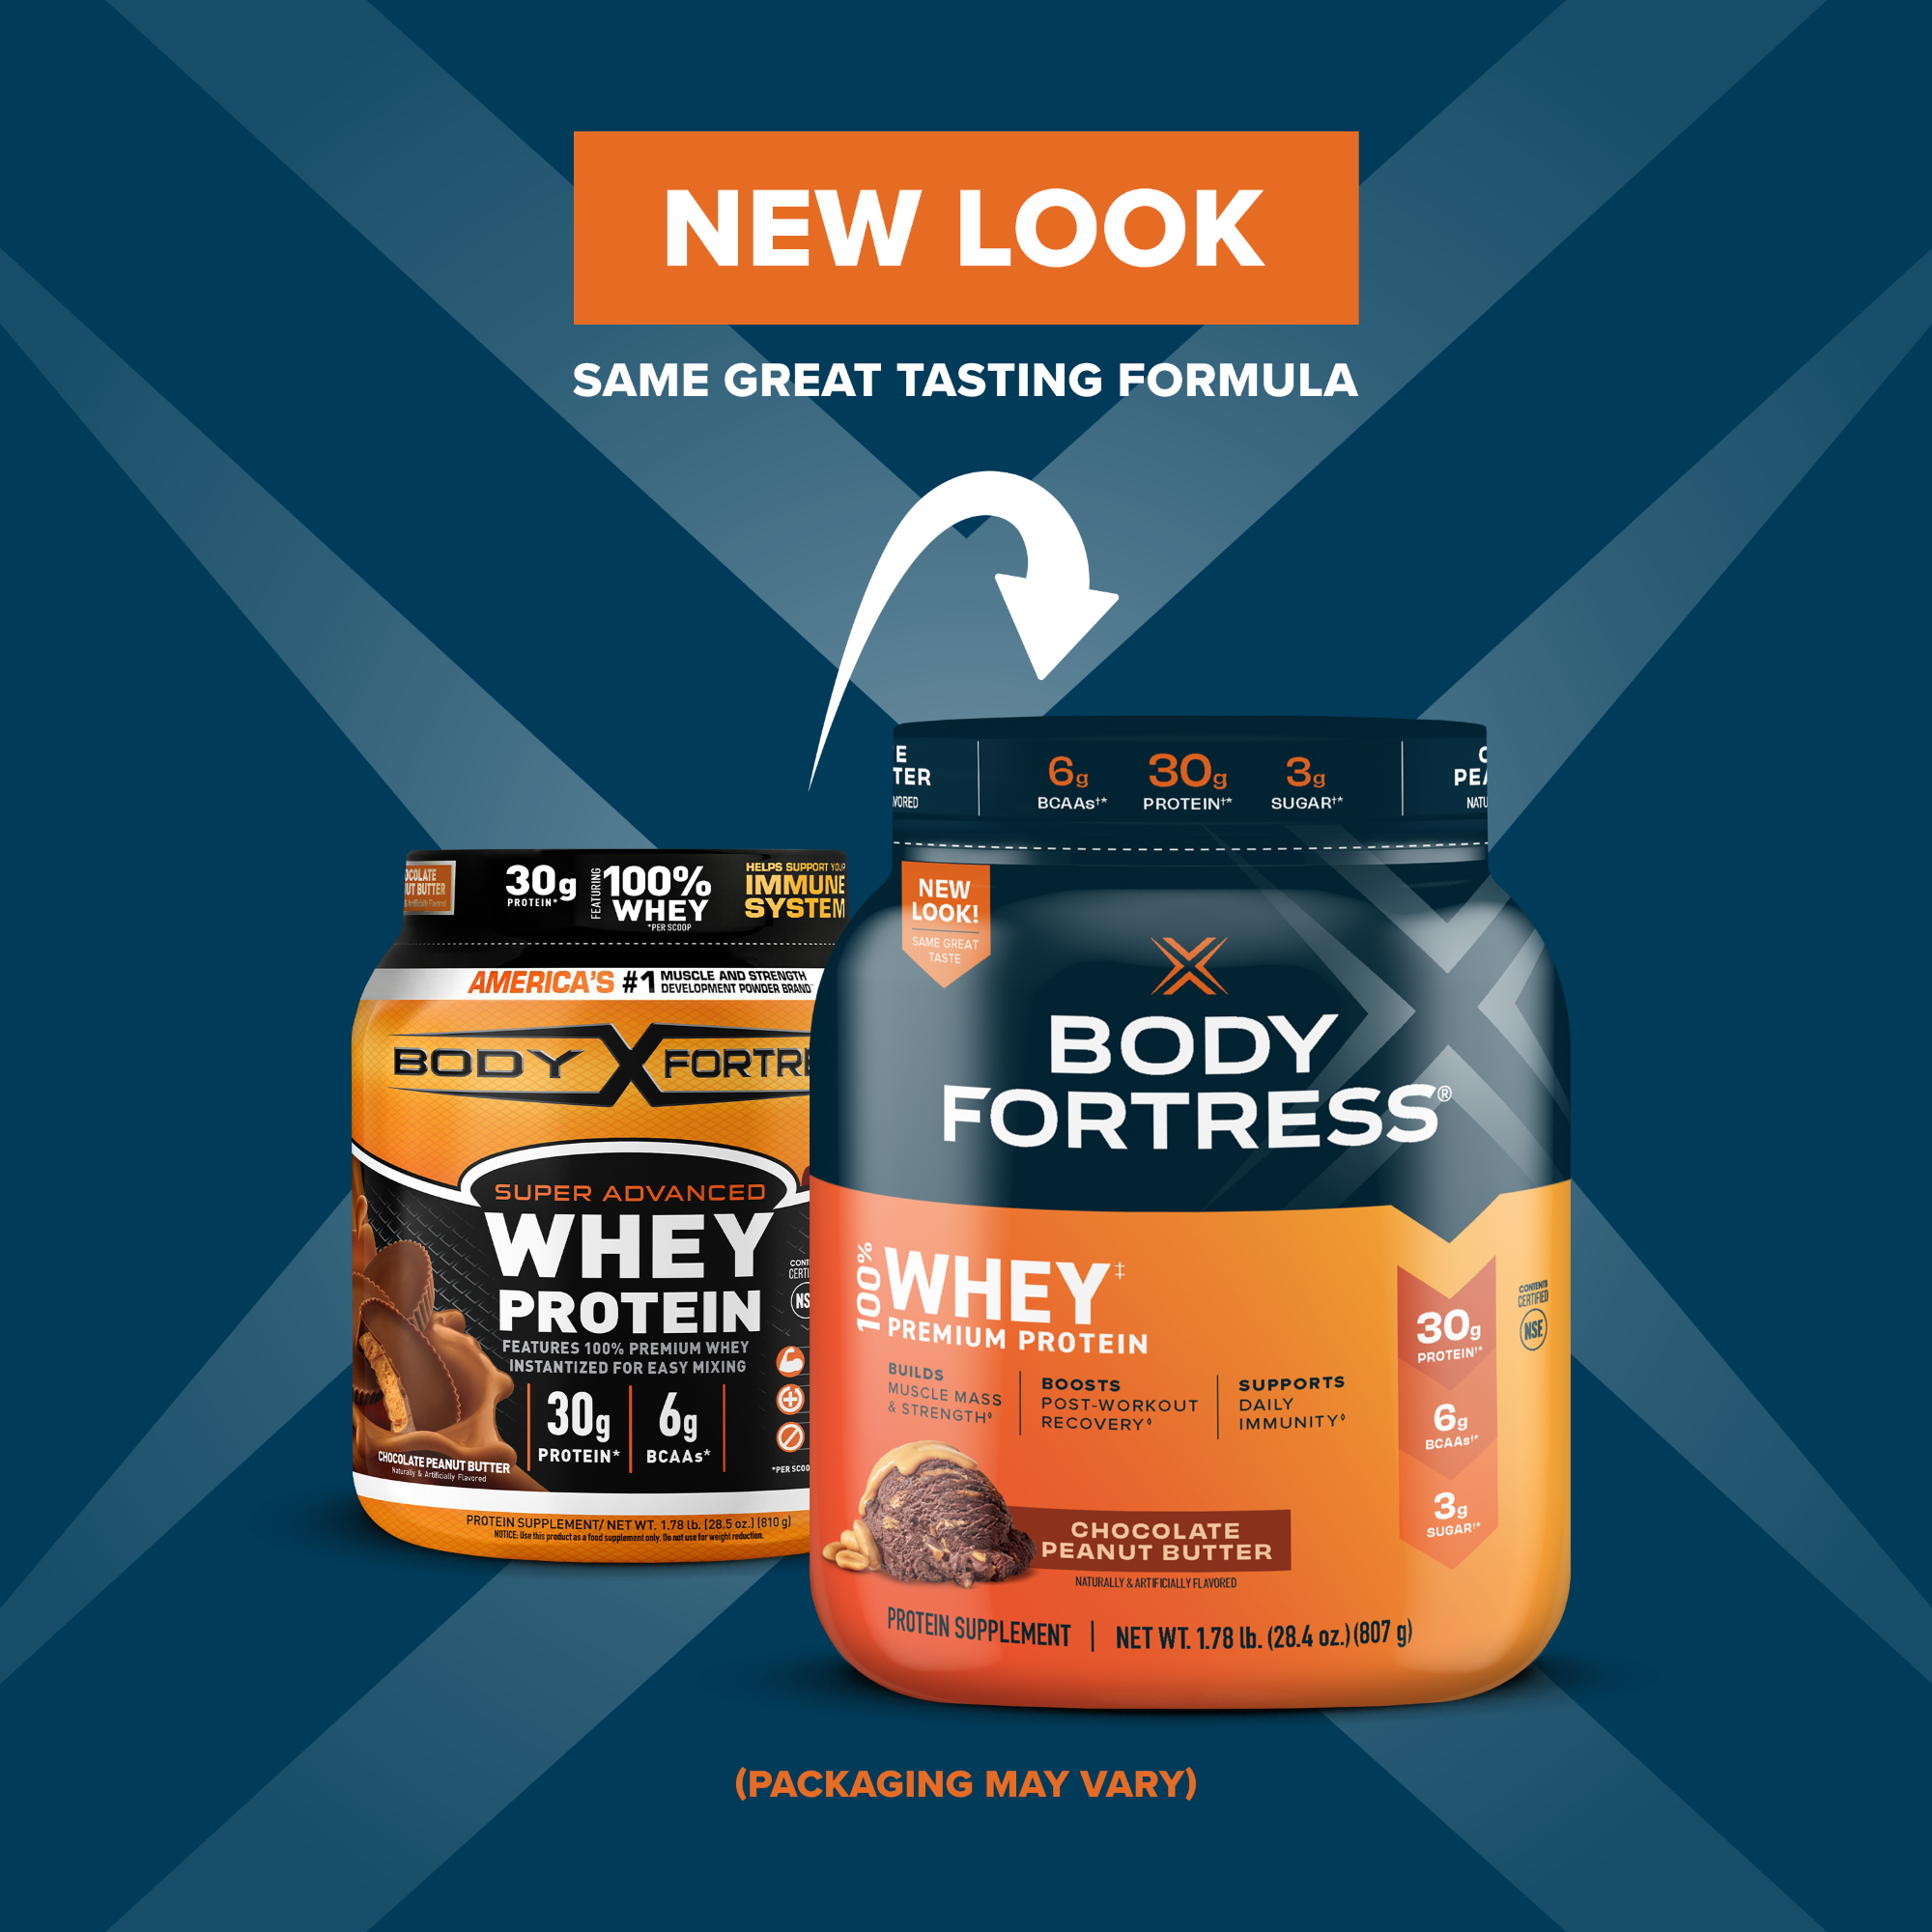 Body Fortress 100% Whey, Premium Protein Powder, Chocolate Peanut Butter, 1.78lbs (Packaging May Vary) - image 2 of 8